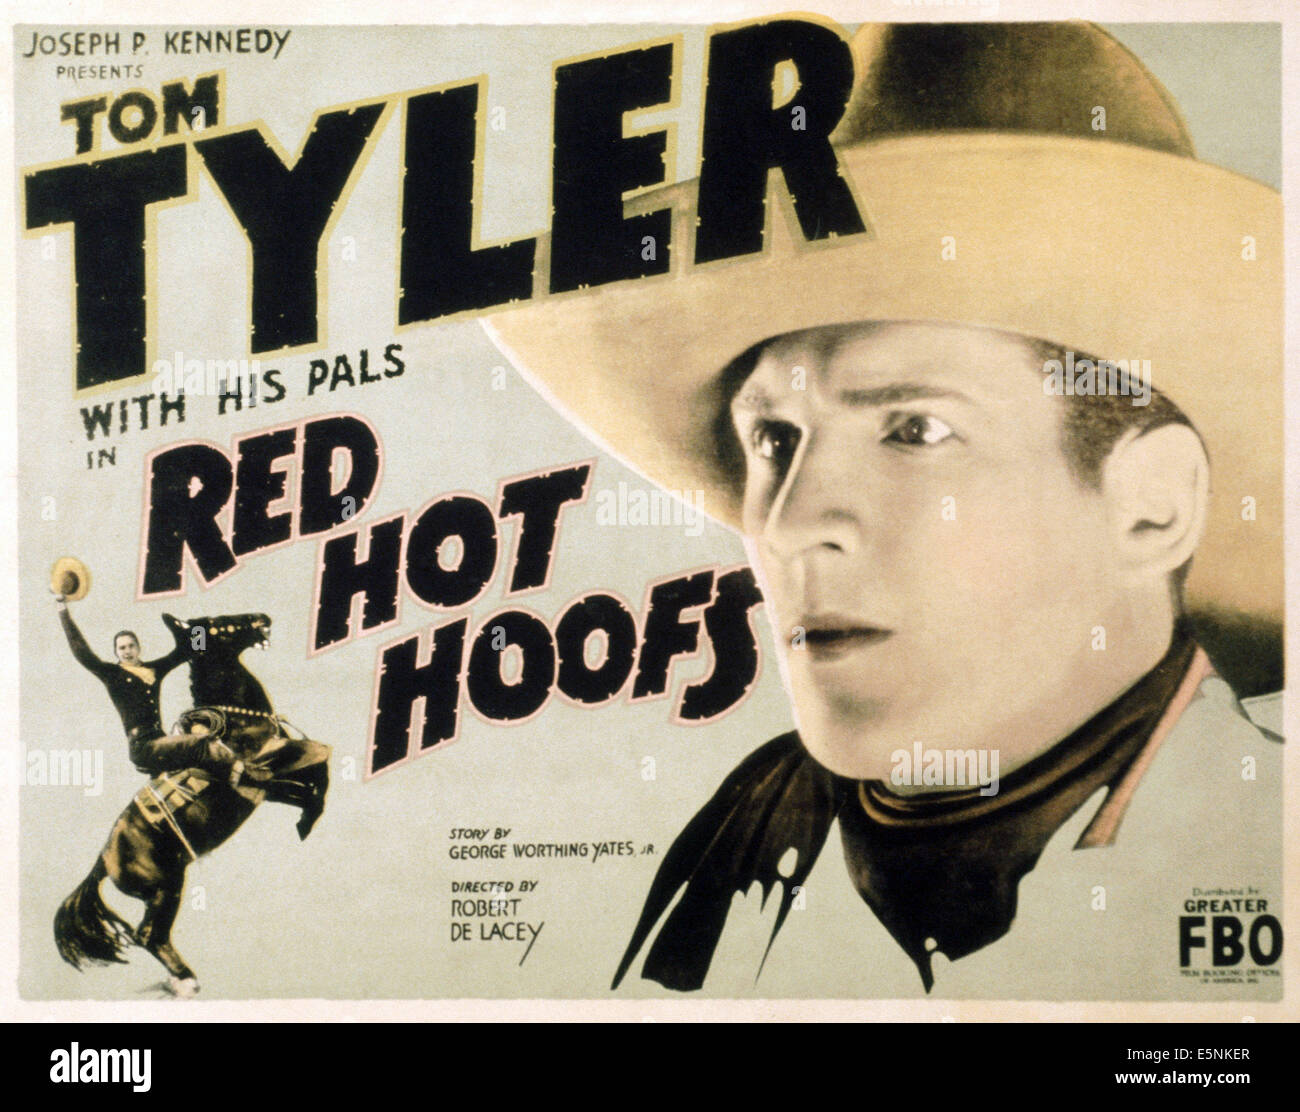 RED HOT HOOFS, US poster, Tom Tyler, 1926 Stock Photo